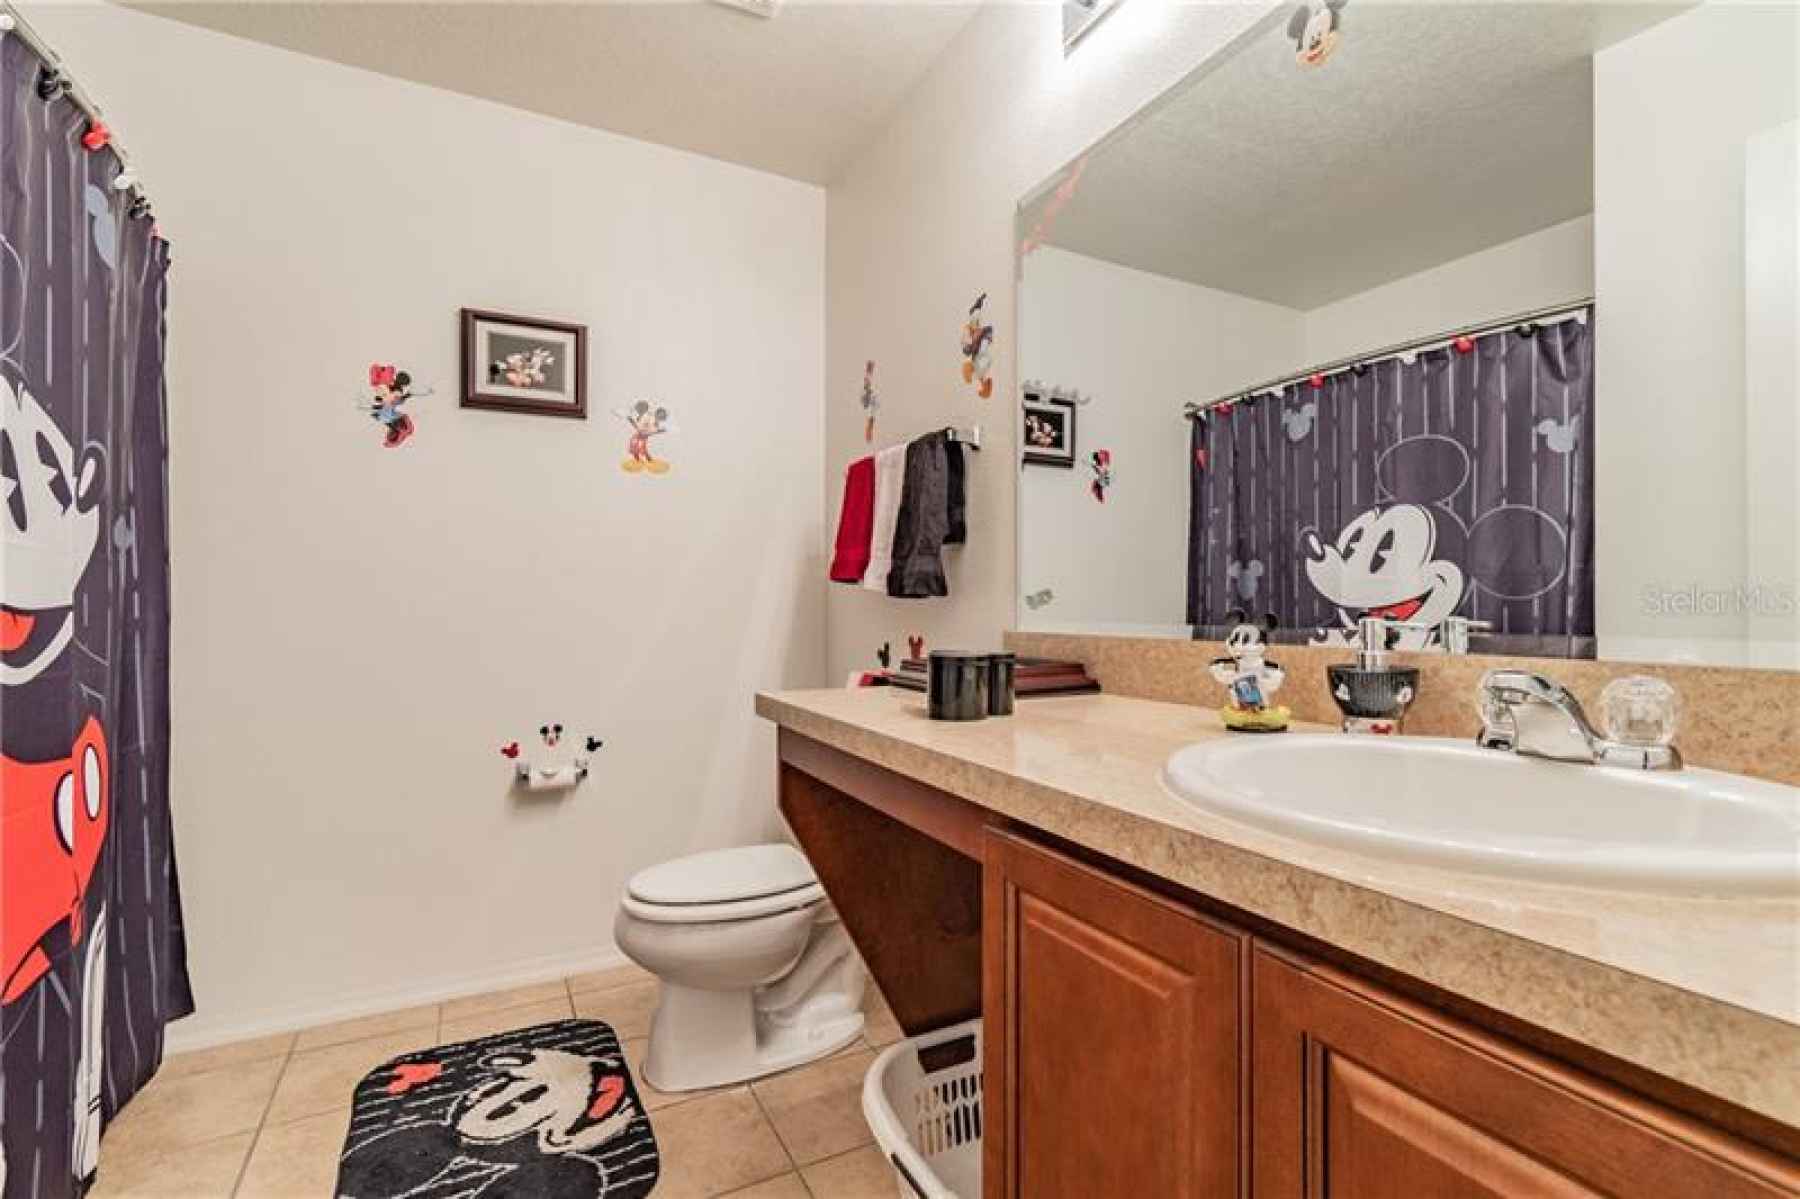 Guest Bathroom with a little more Mickey Mouse